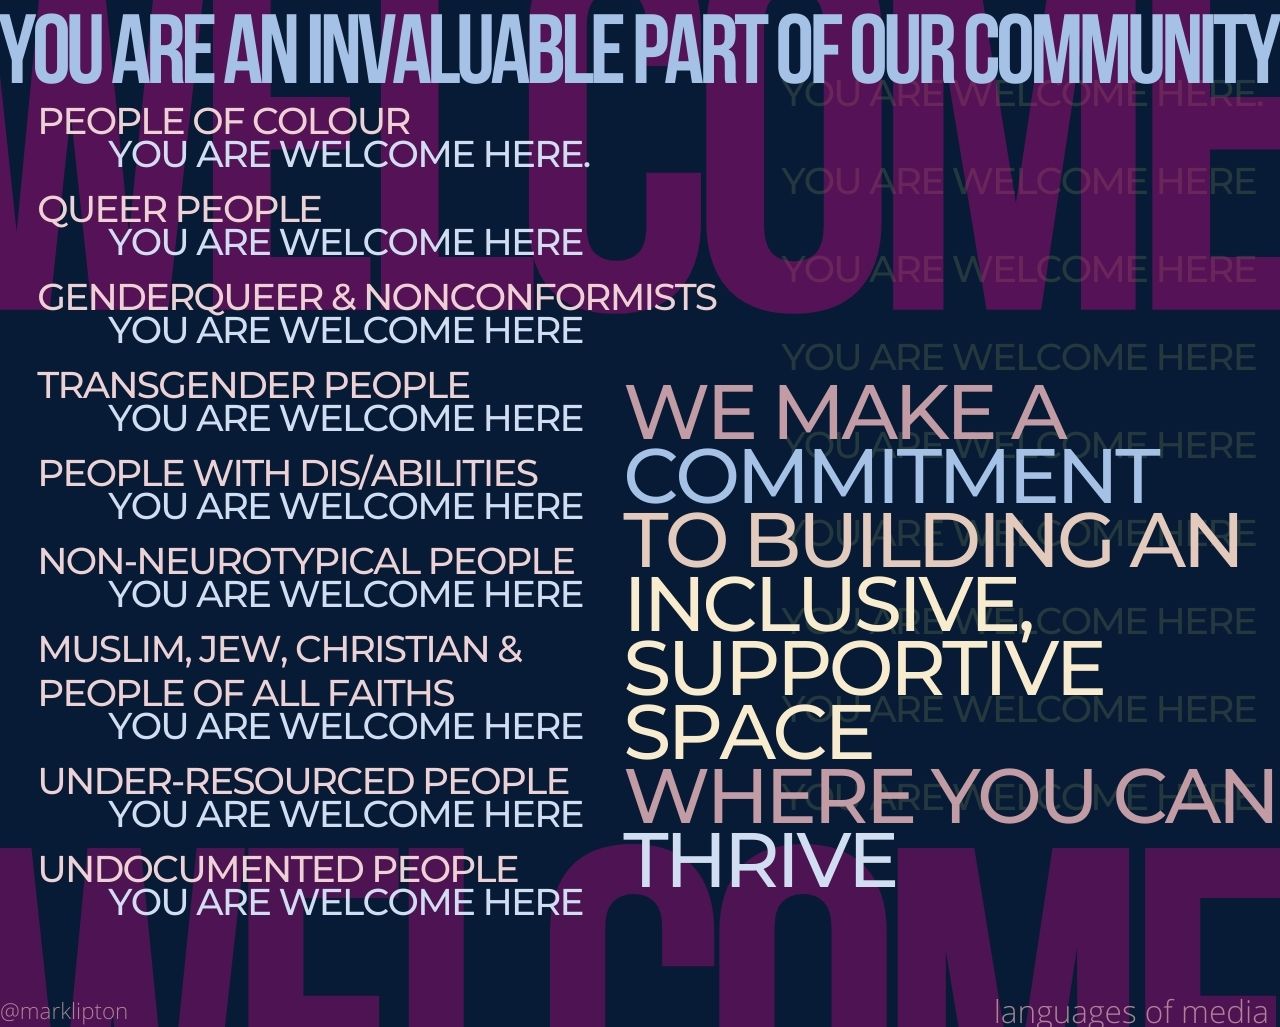 WELCOME: You are an invaluable part of our community. people of colour; you are welcome here Queer people; you are welcome here genderqueer & nonconformists; you are welcome here transgender people; you are welcome here people with dis/abilities; you are welcome here non-neurotypical people; you are welcome here Muslim, jew, Christian & people of all faiths; you are welcome here under-resourced people; you are welcome here Undocumented people; you are welcome here we make a commitment to building an inclusive, supportive space where you can thrive.]